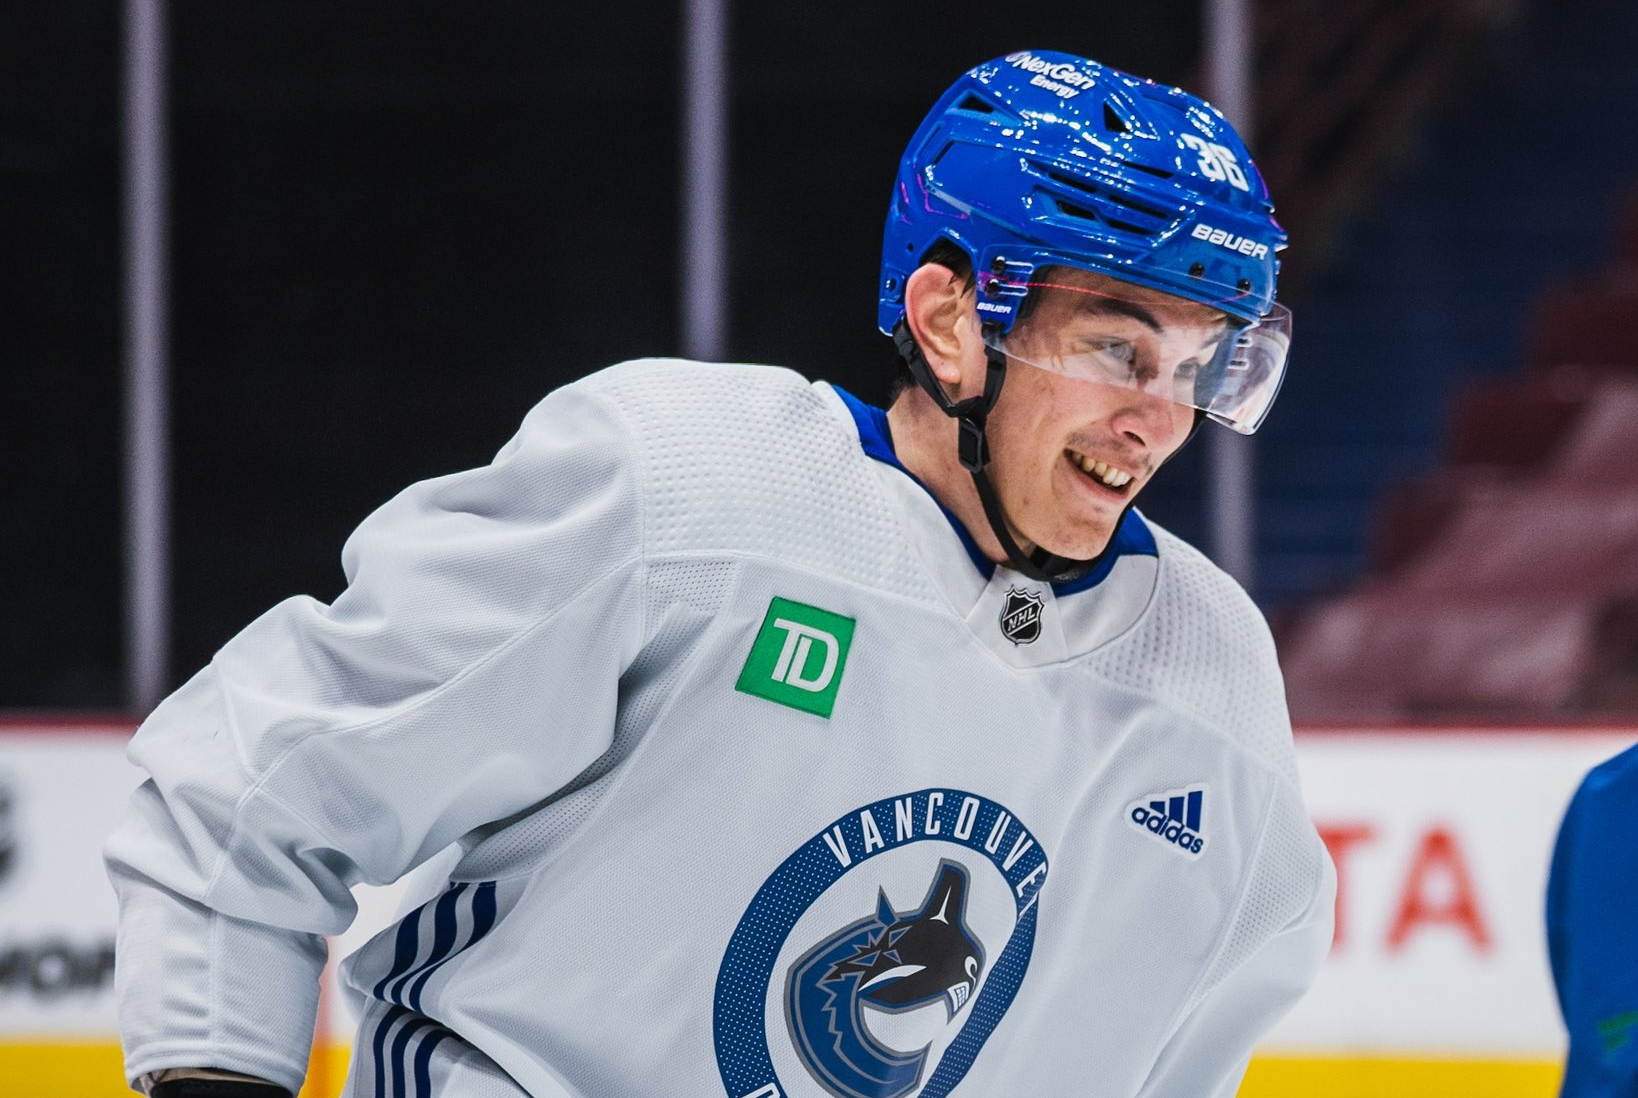 Elias Pettersson's 11 best looks show he's the best-dressed Canuck